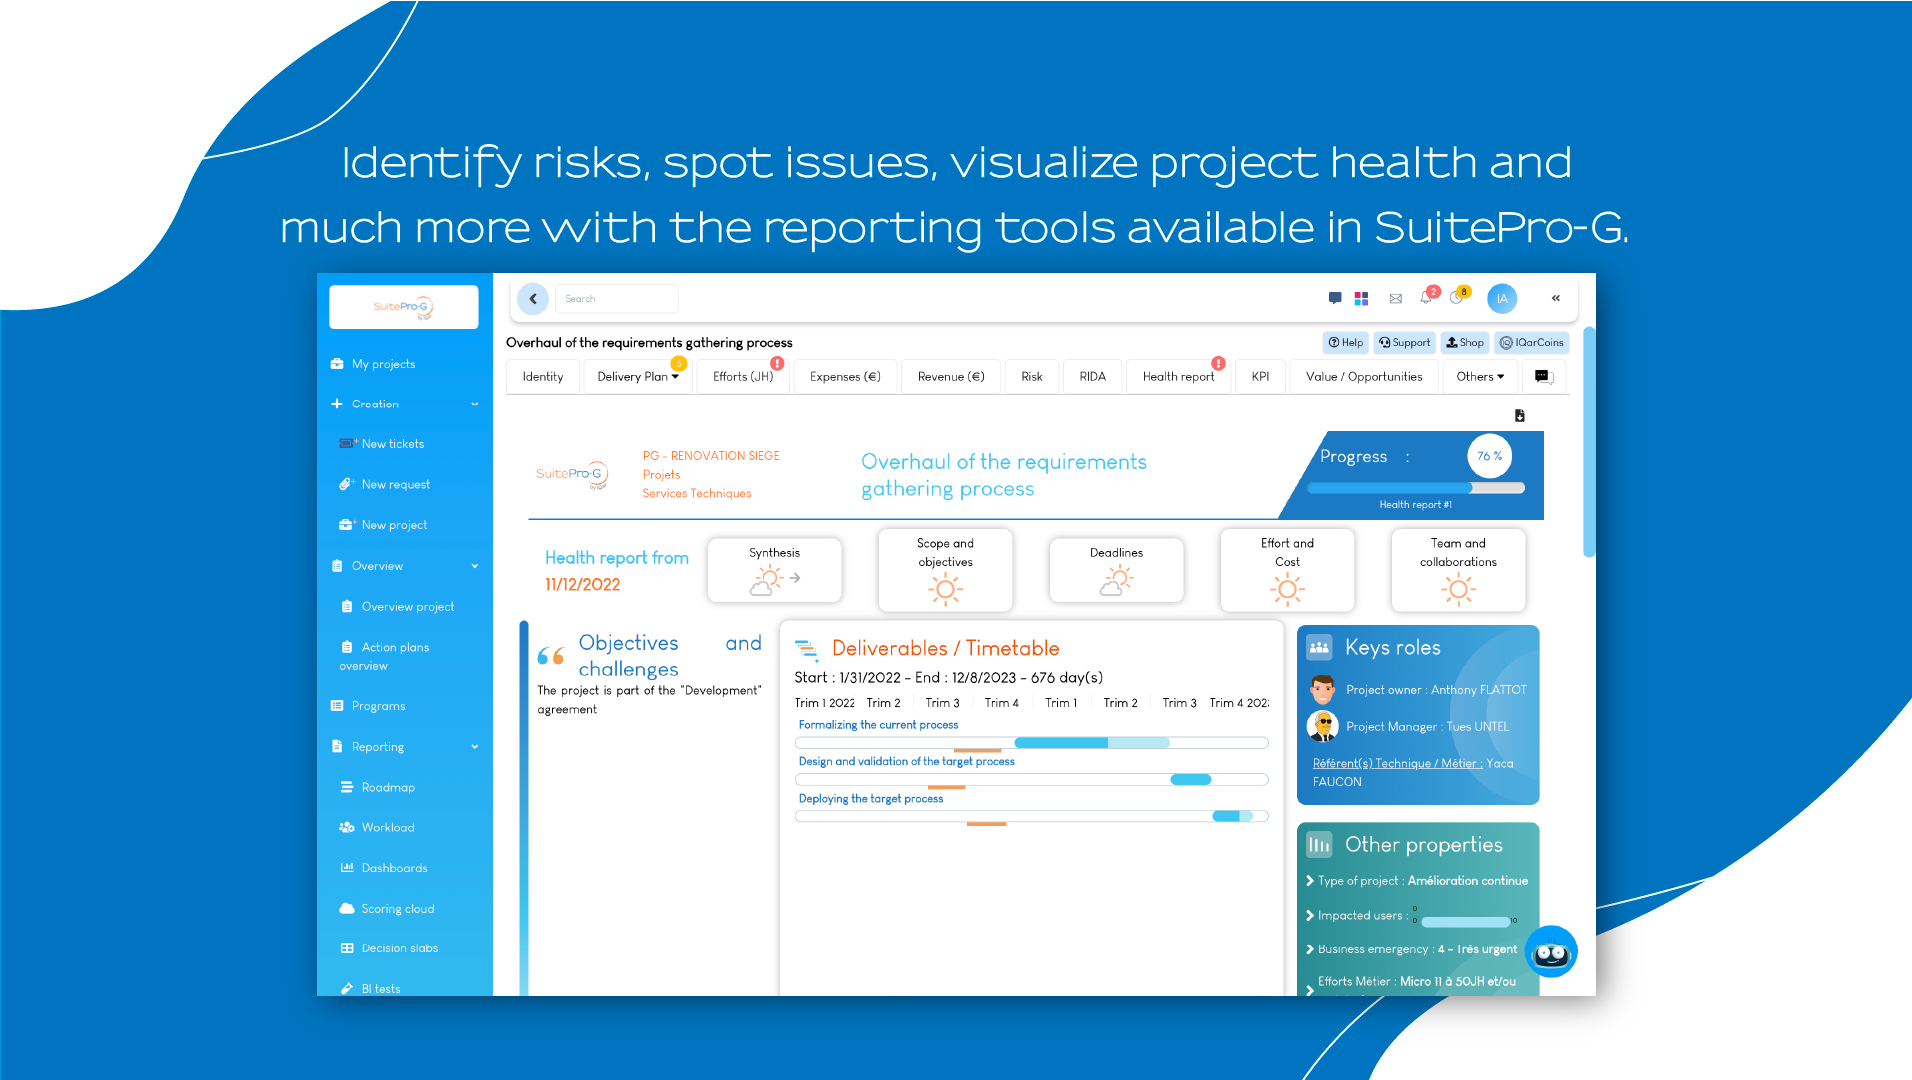 Many reporting tools available in SuitePro-G